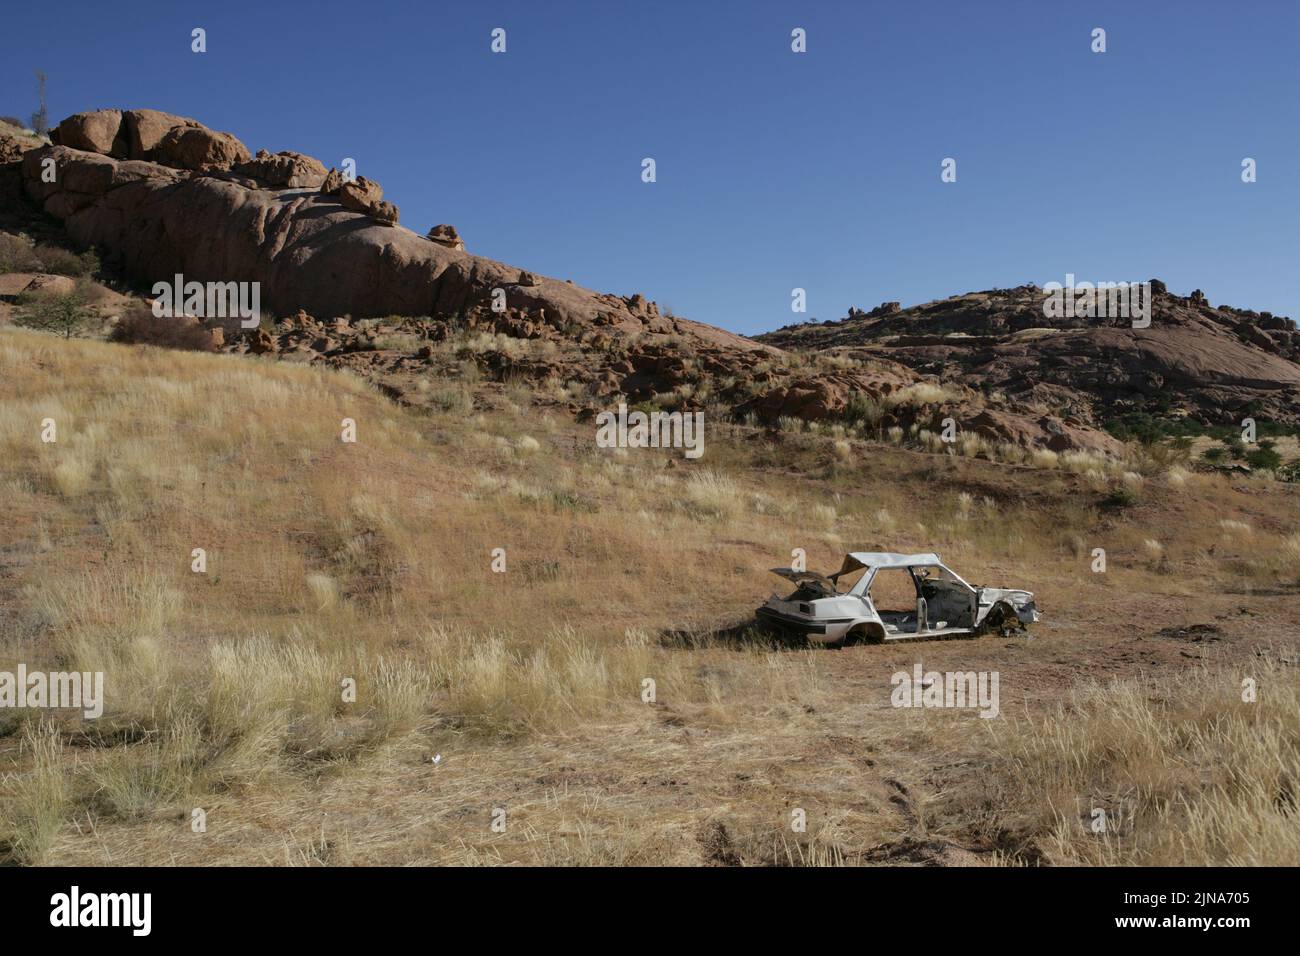 Abandoned car wreckage at the side of a road, Namib Desert, Namibia Stock Photo